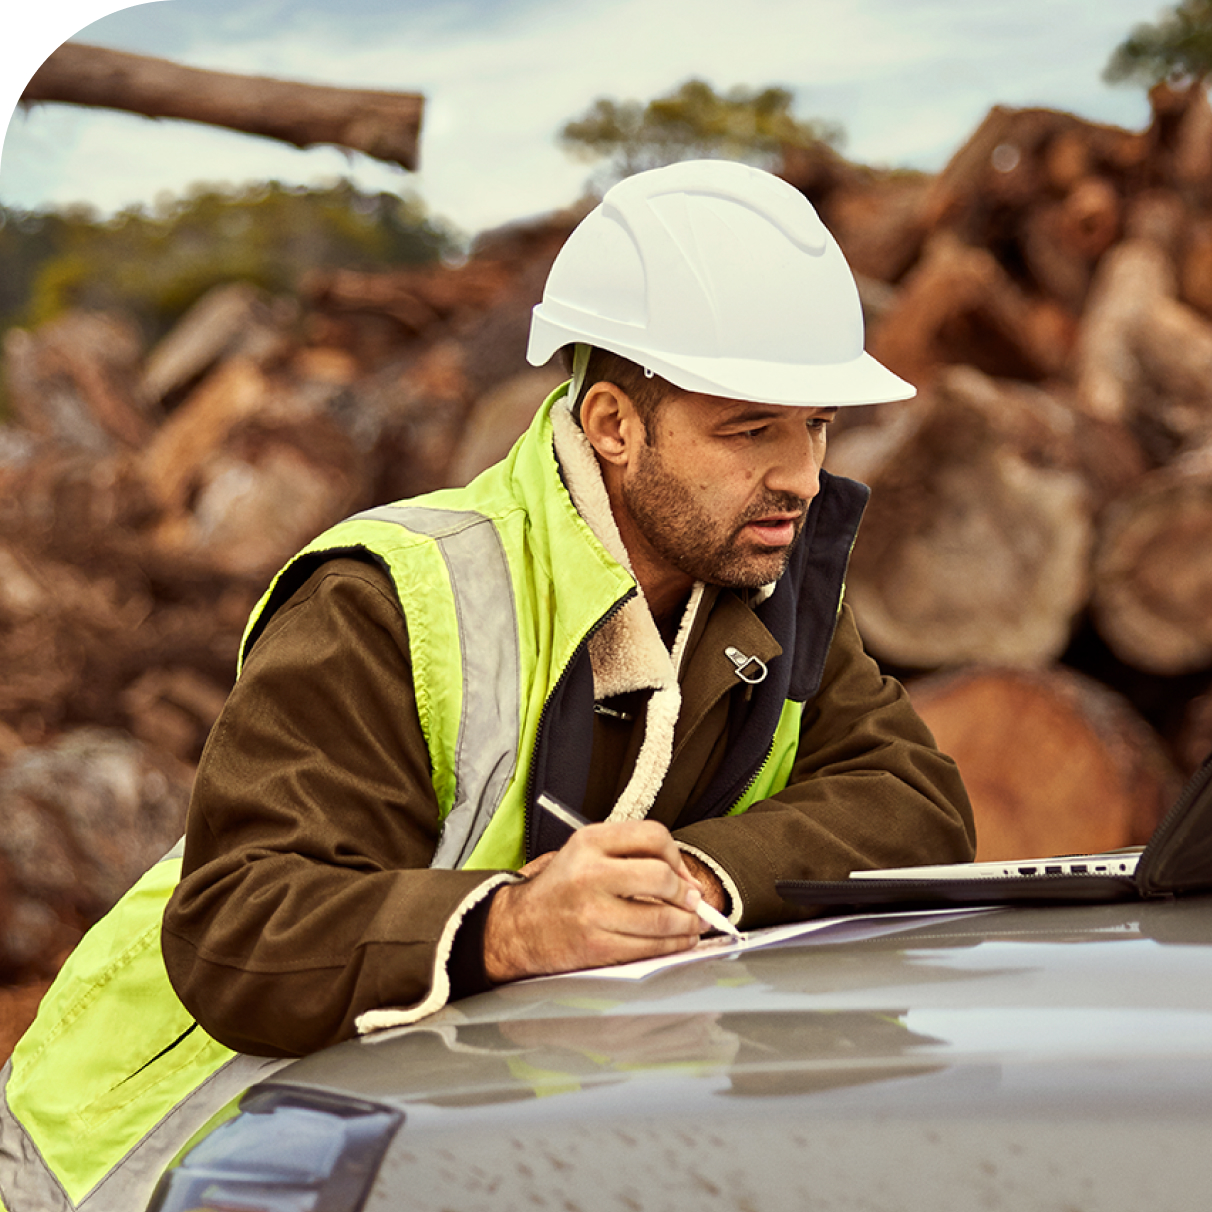 man leaning on car bonnet looking over building plans wearing a hard hat